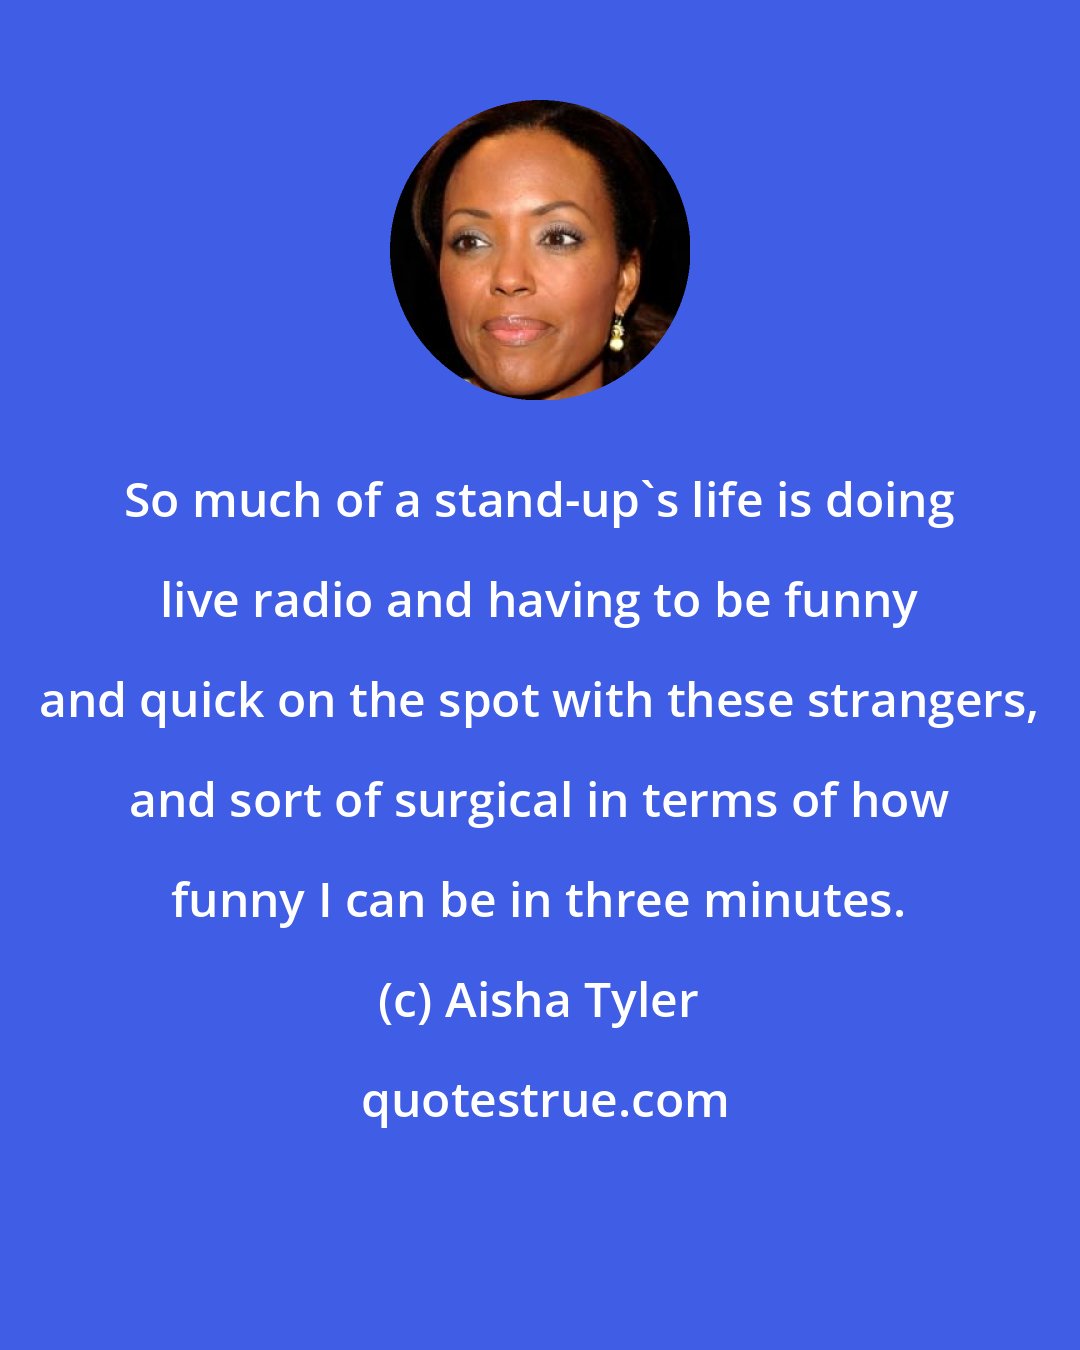 Aisha Tyler: So much of a stand-up's life is doing live radio and having to be funny and quick on the spot with these strangers, and sort of surgical in terms of how funny I can be in three minutes.